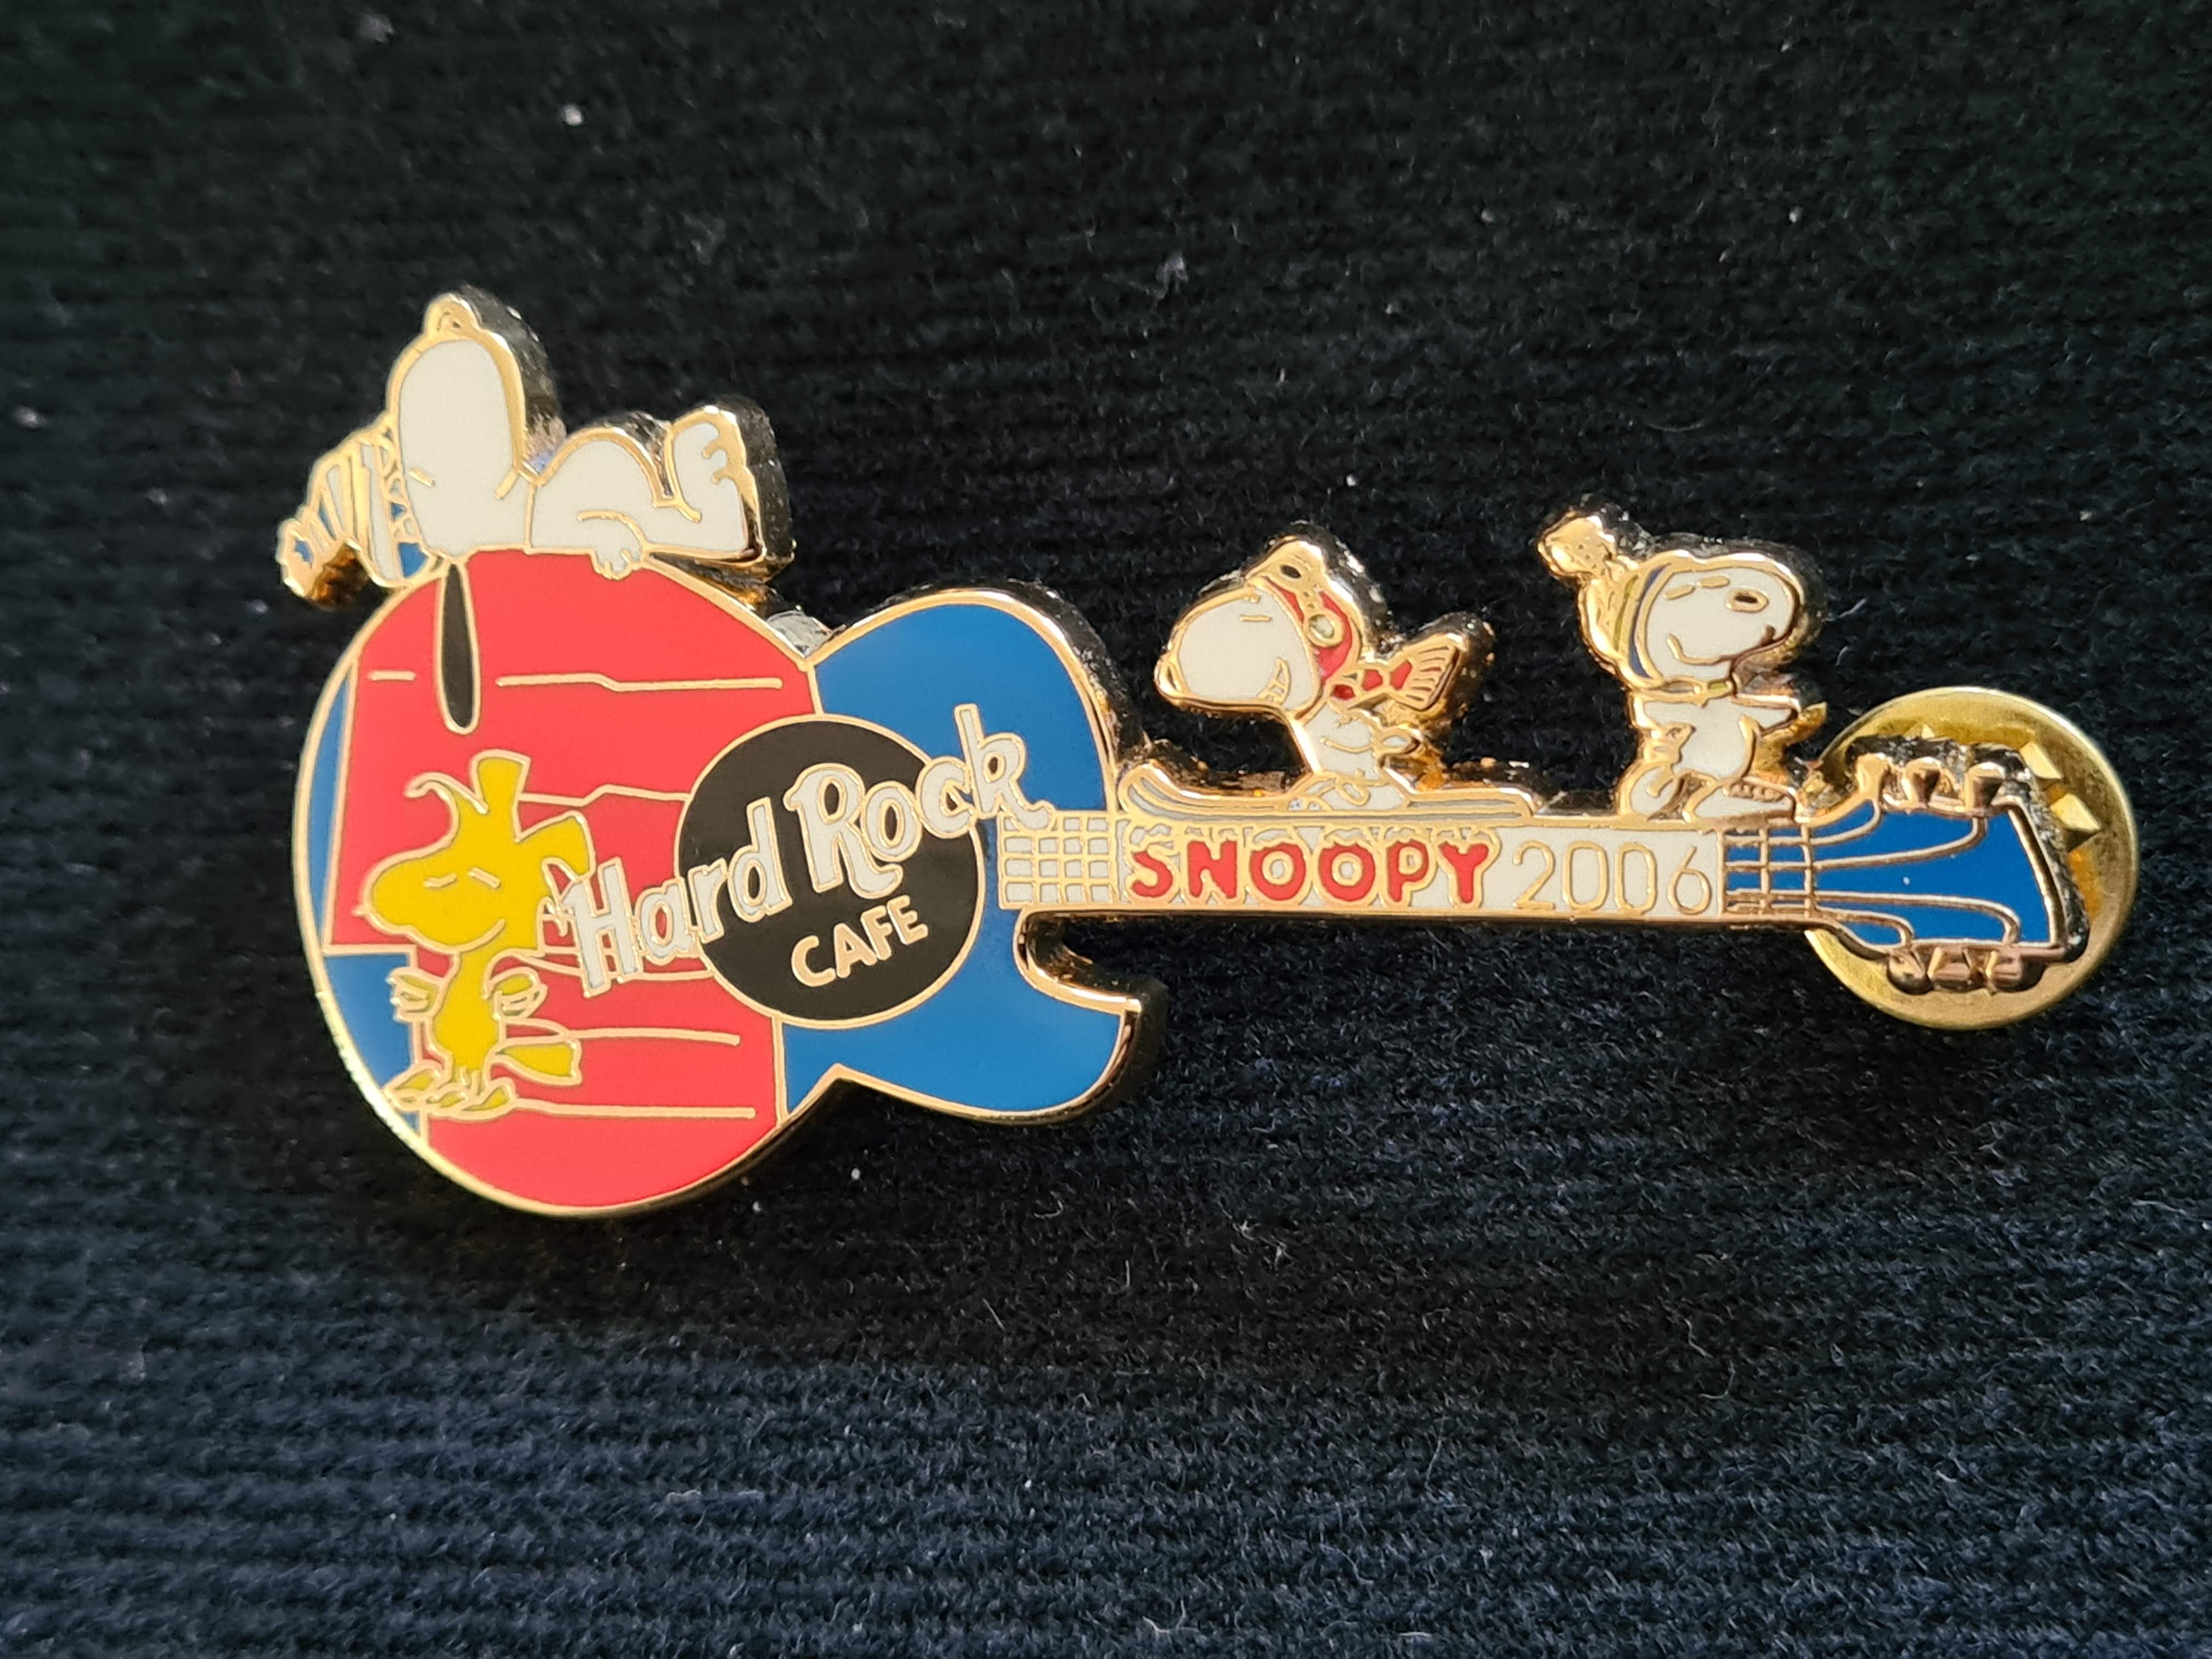 Snoopy Peanuts - Guitar red and blue winther 2006